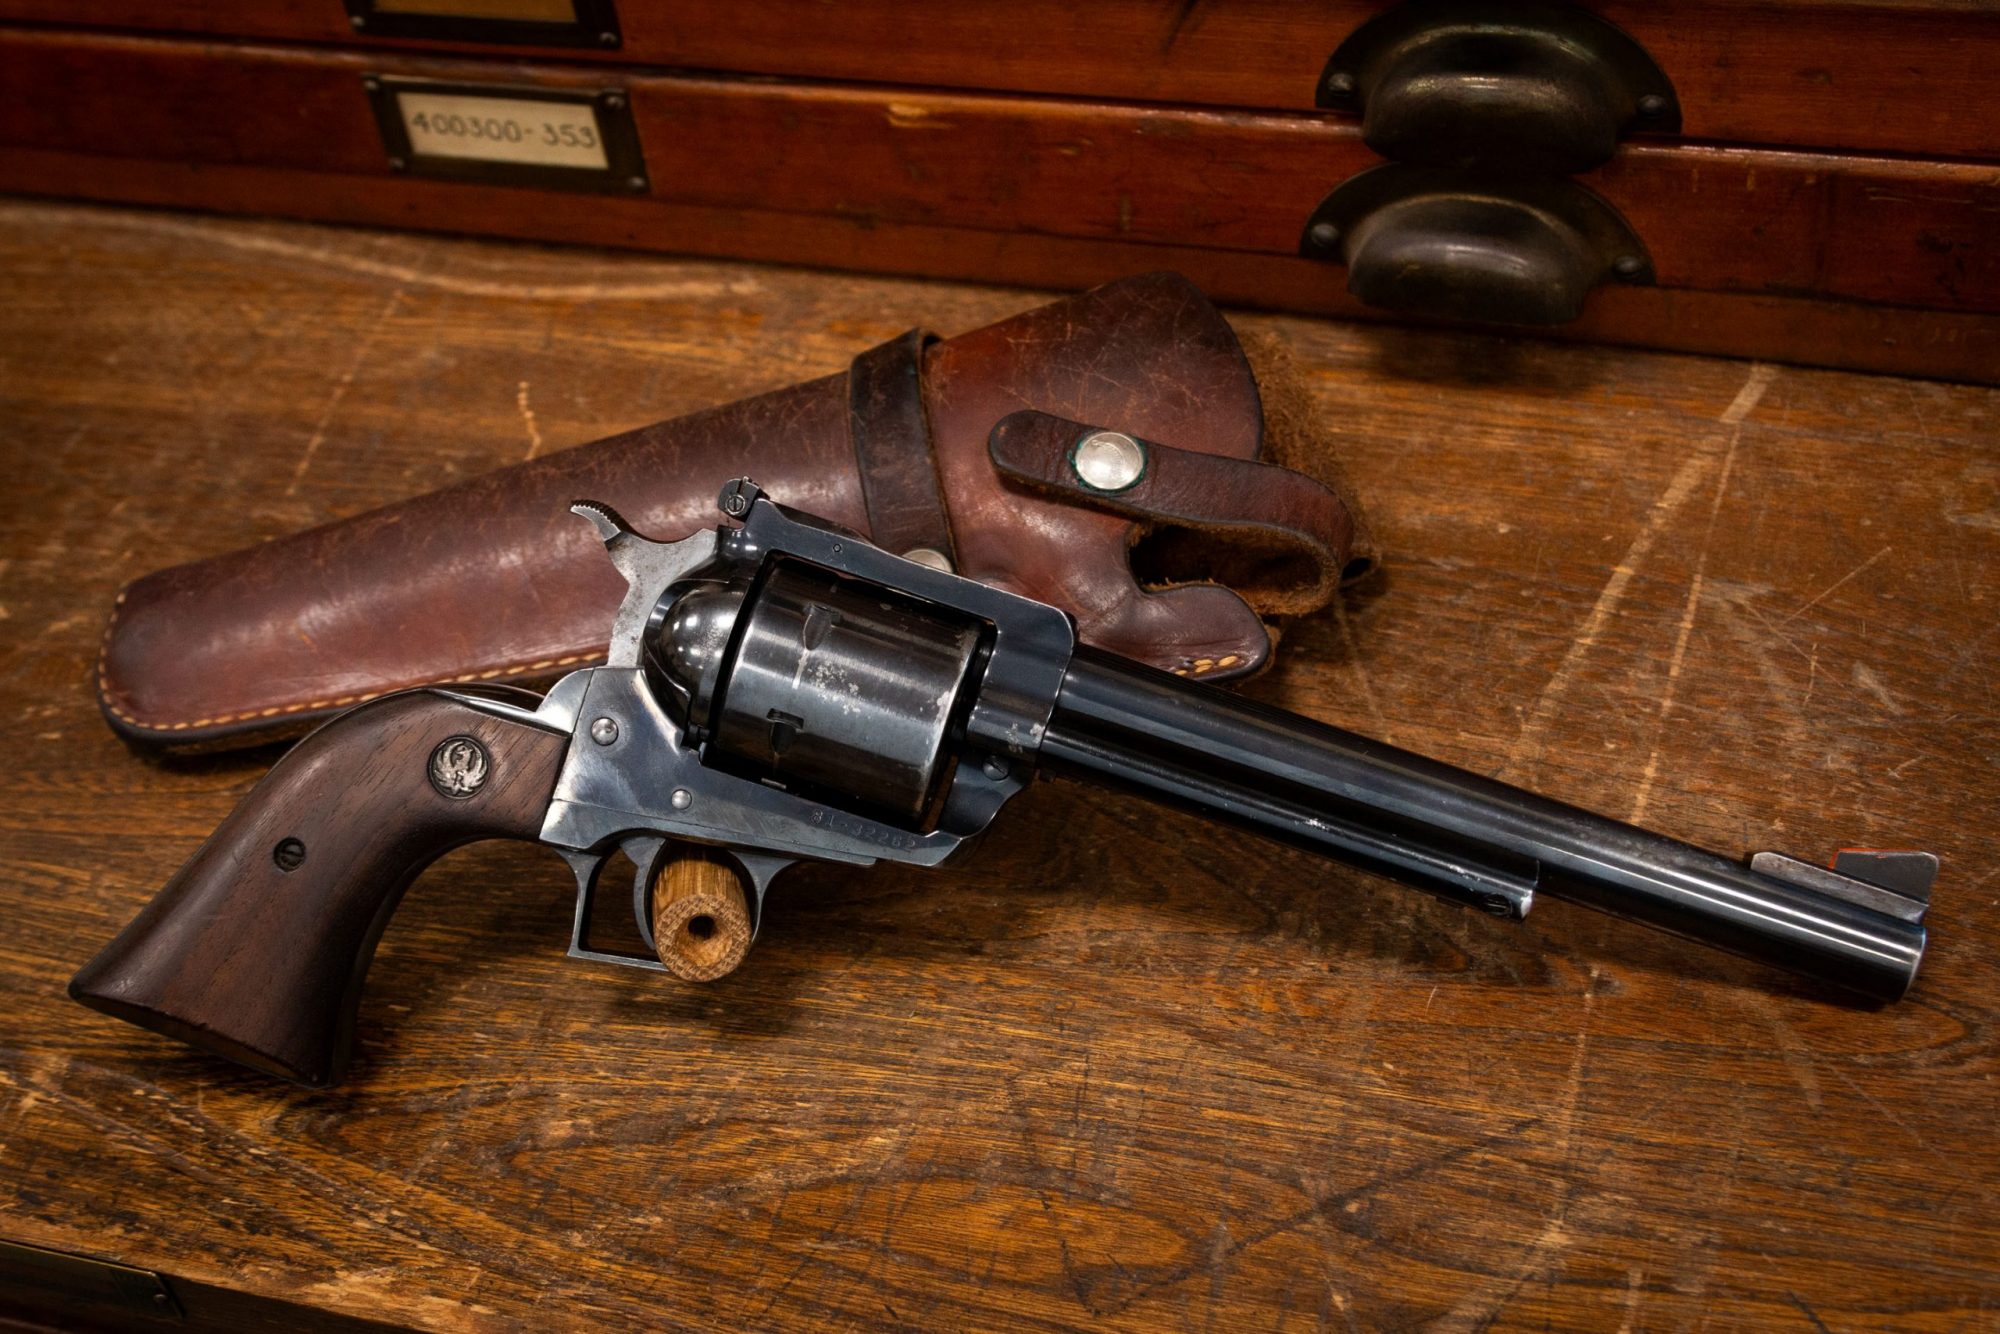 Photo of a pre-owned Ruger Super Blackhawk, for sale as-is through Turnbull Restoration of Bloomfield, NY